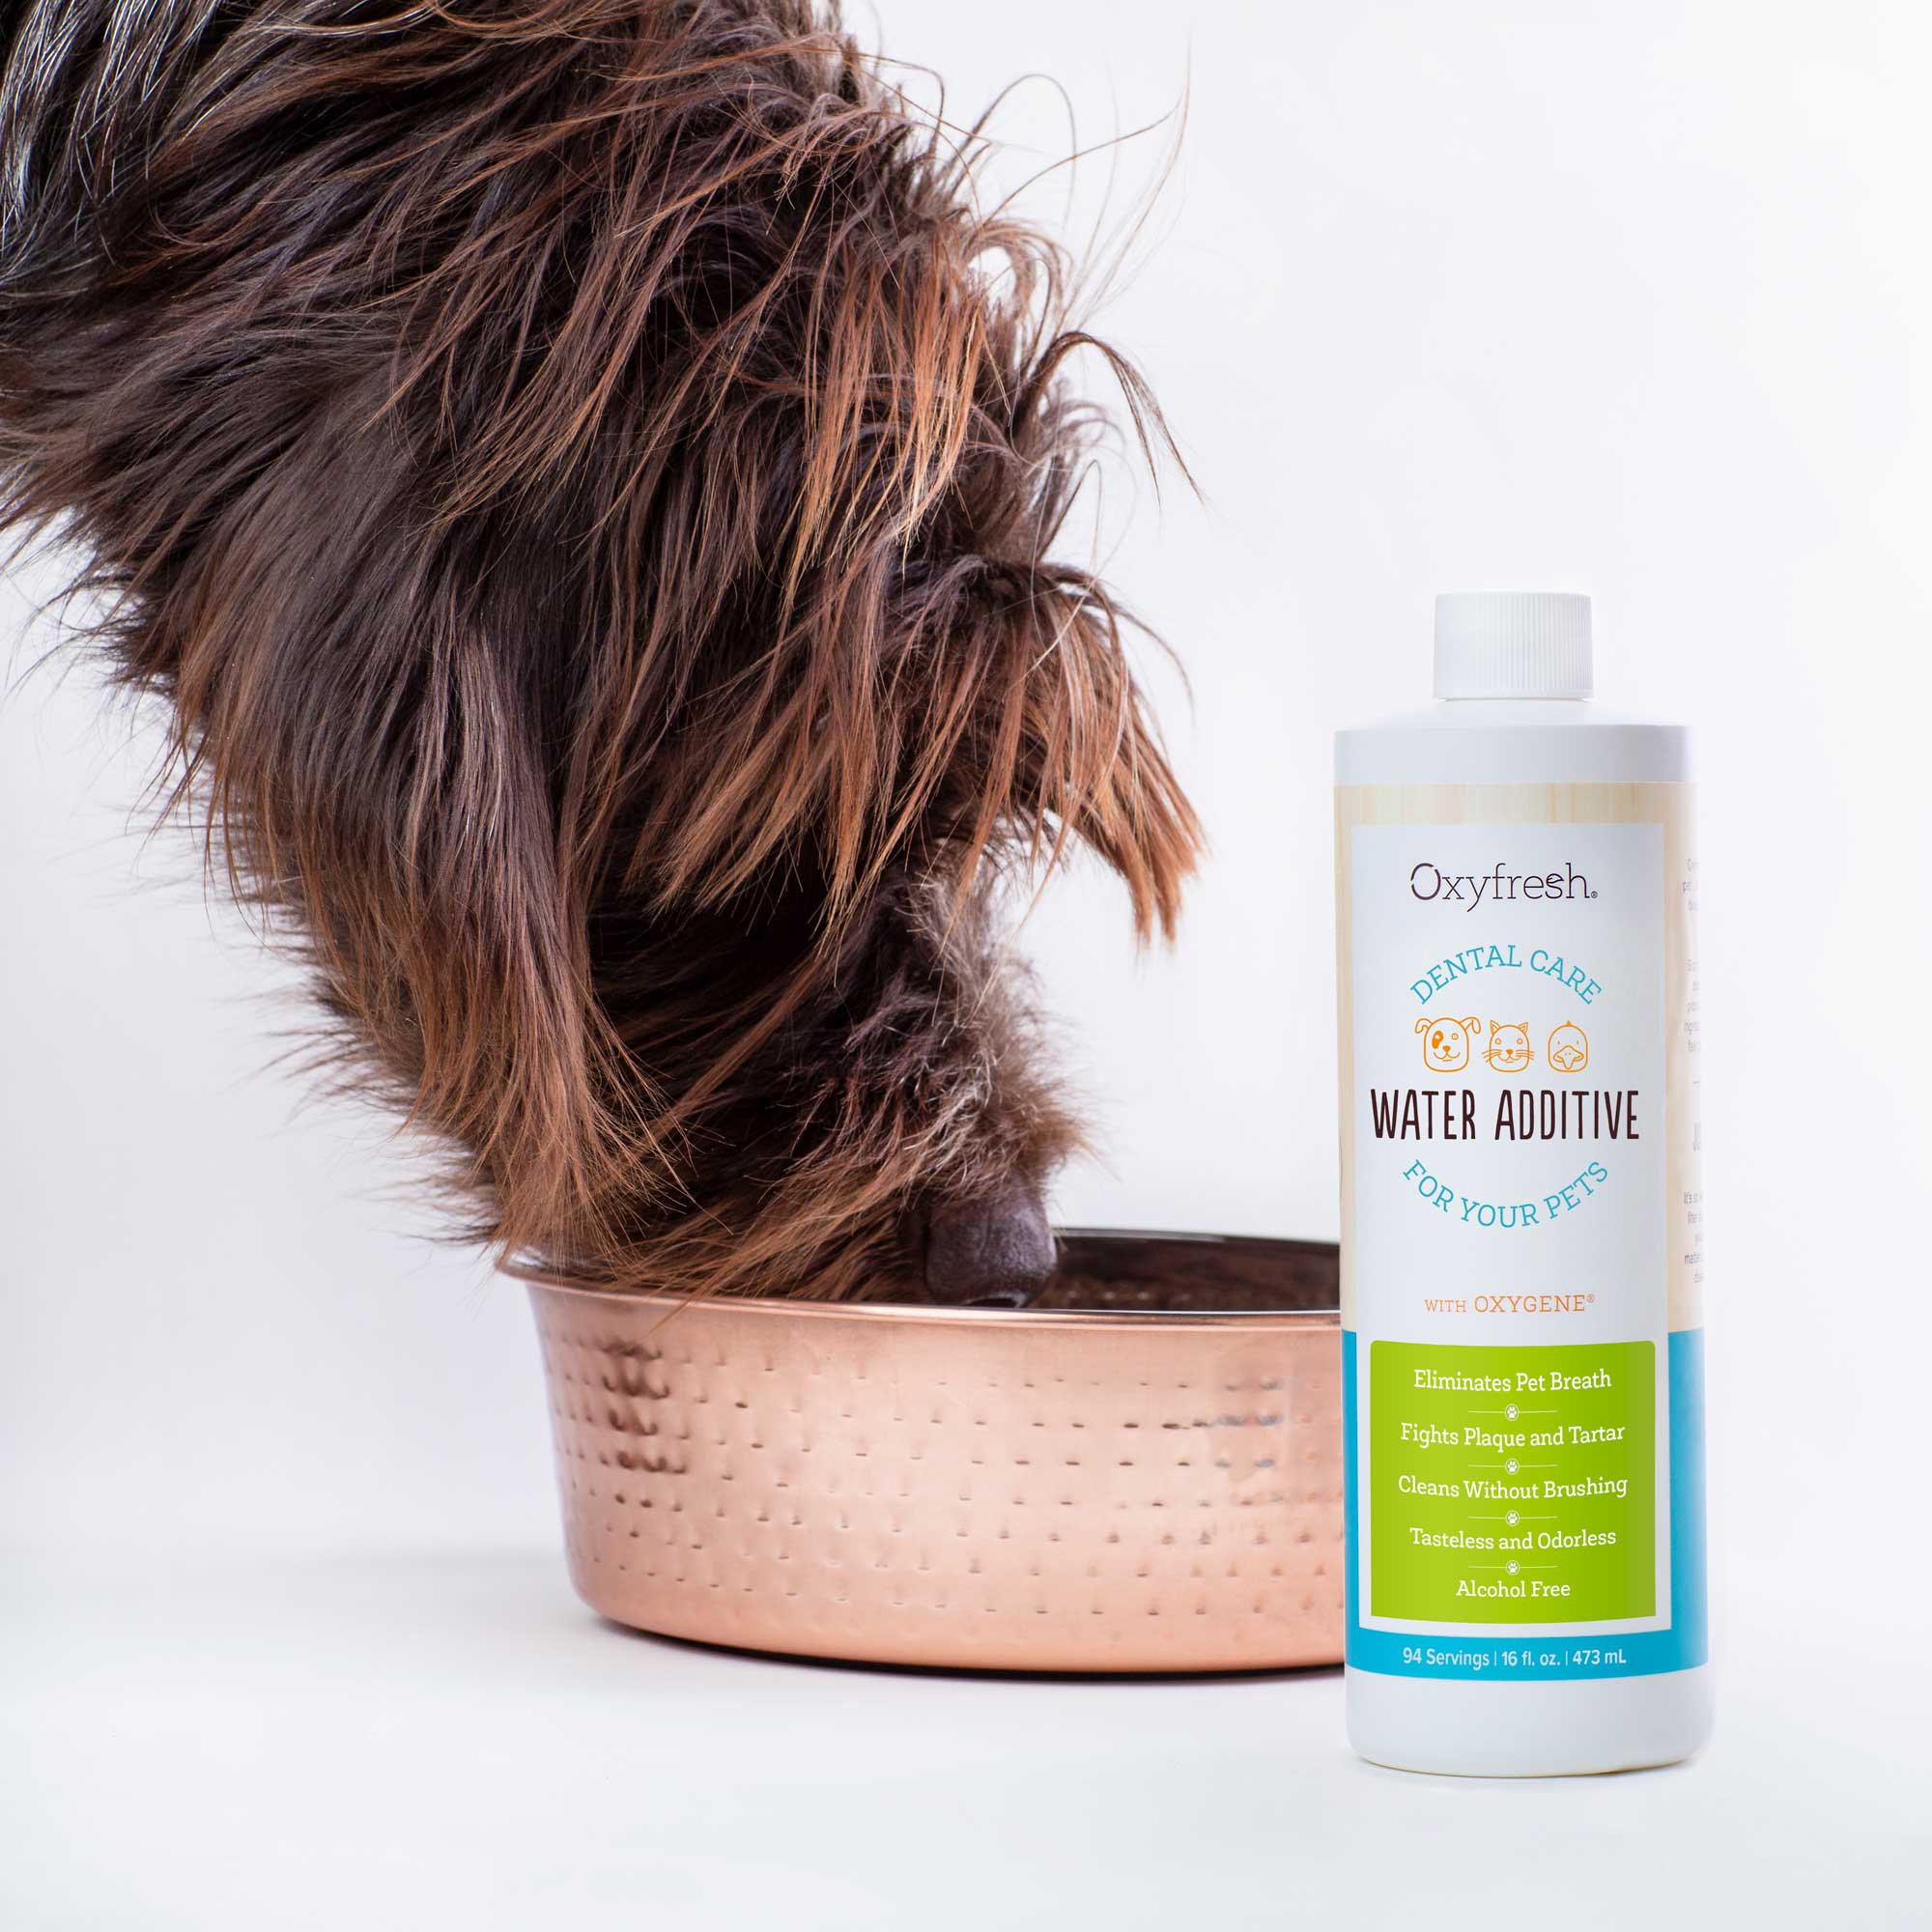 Oxyfresh Featured in Pets Plus Magazine